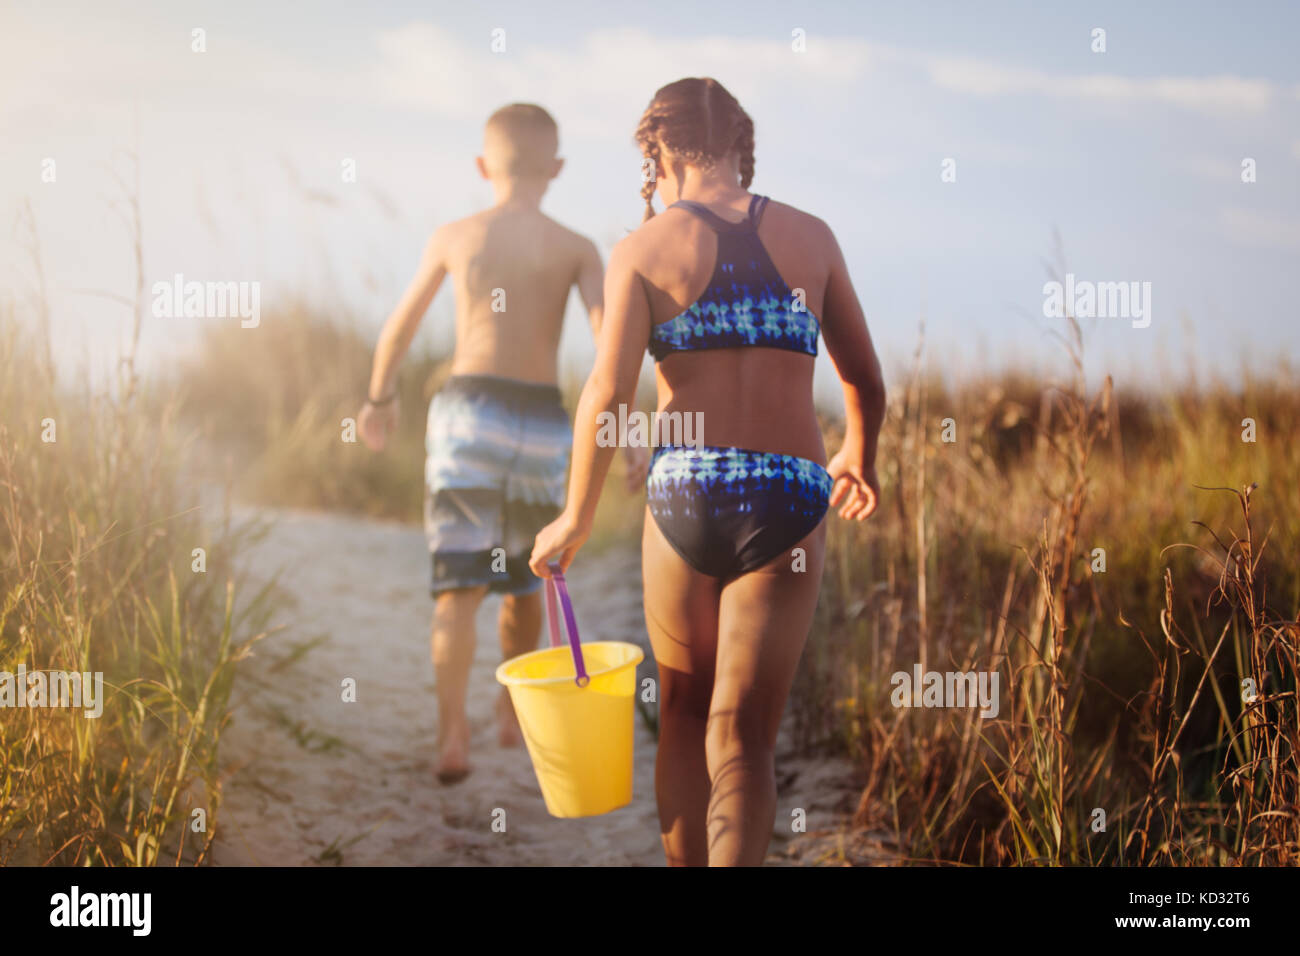 Rear view of girl and boy walking over grassy dune, North Myrtle Beach, South Carolina, United States, North America Stock Photo